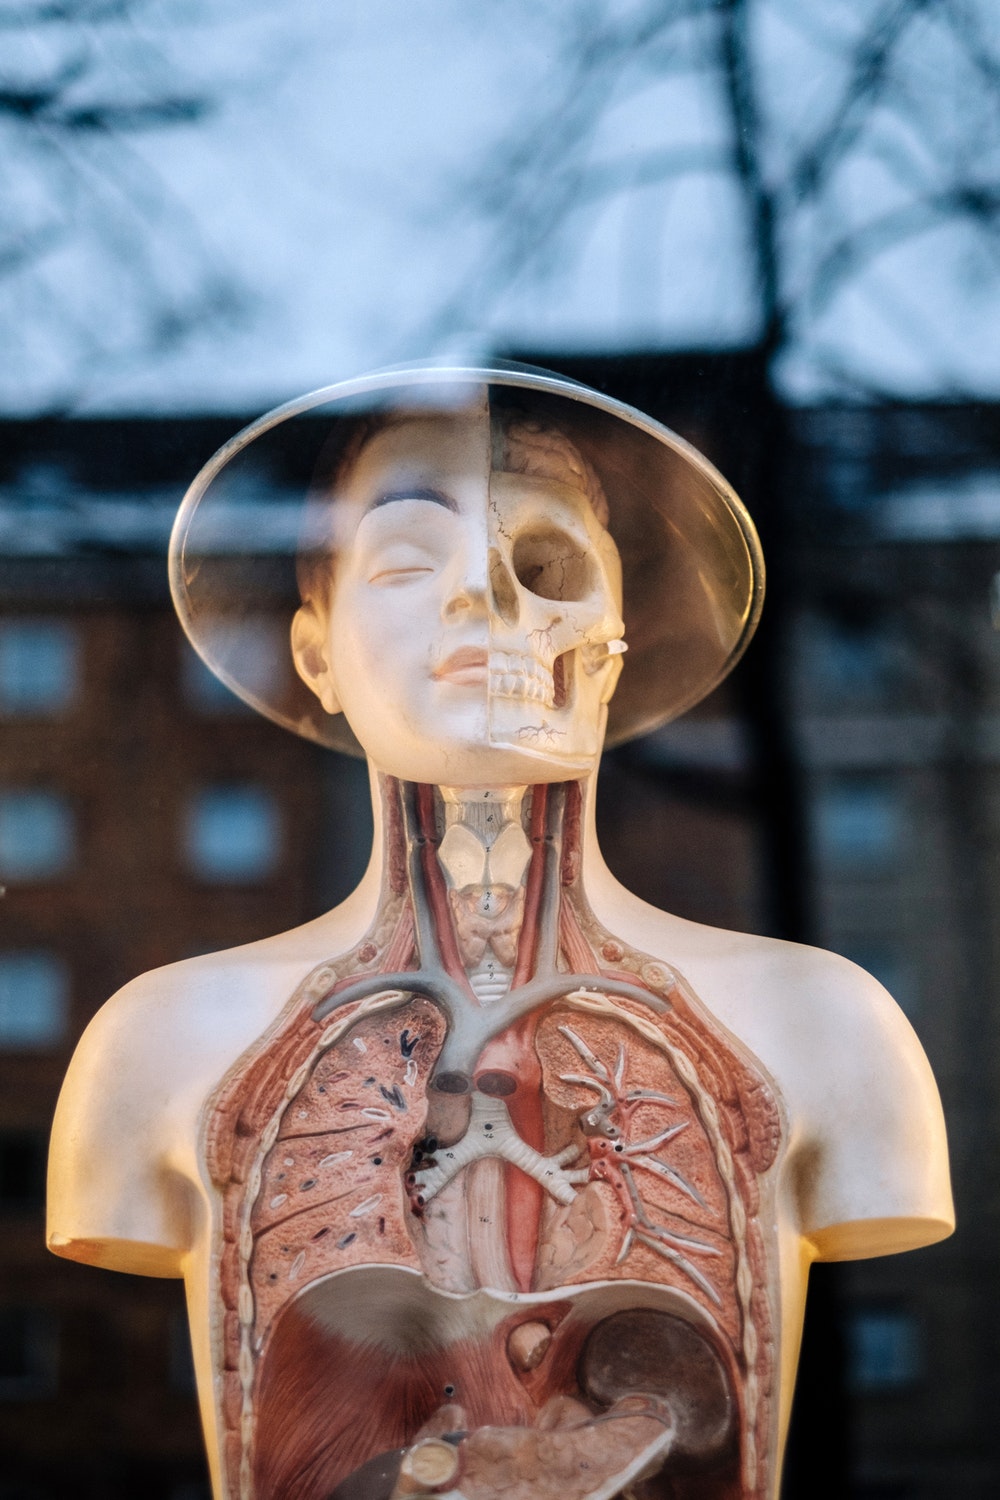 A model of the human body reflected in a window